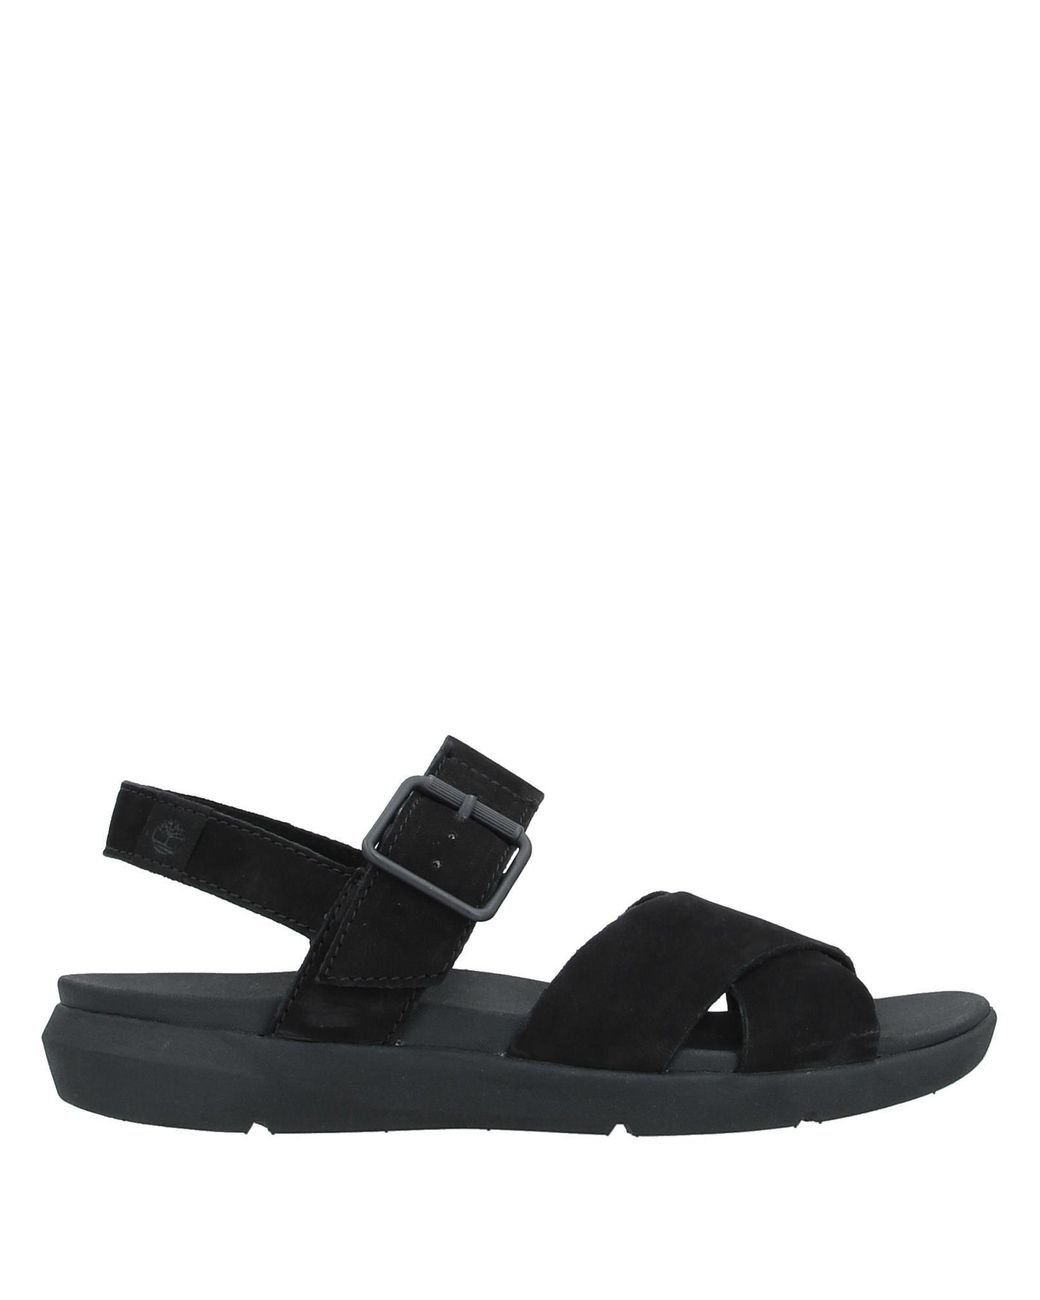 Timberland Rubber Sandals in Black - Lyst